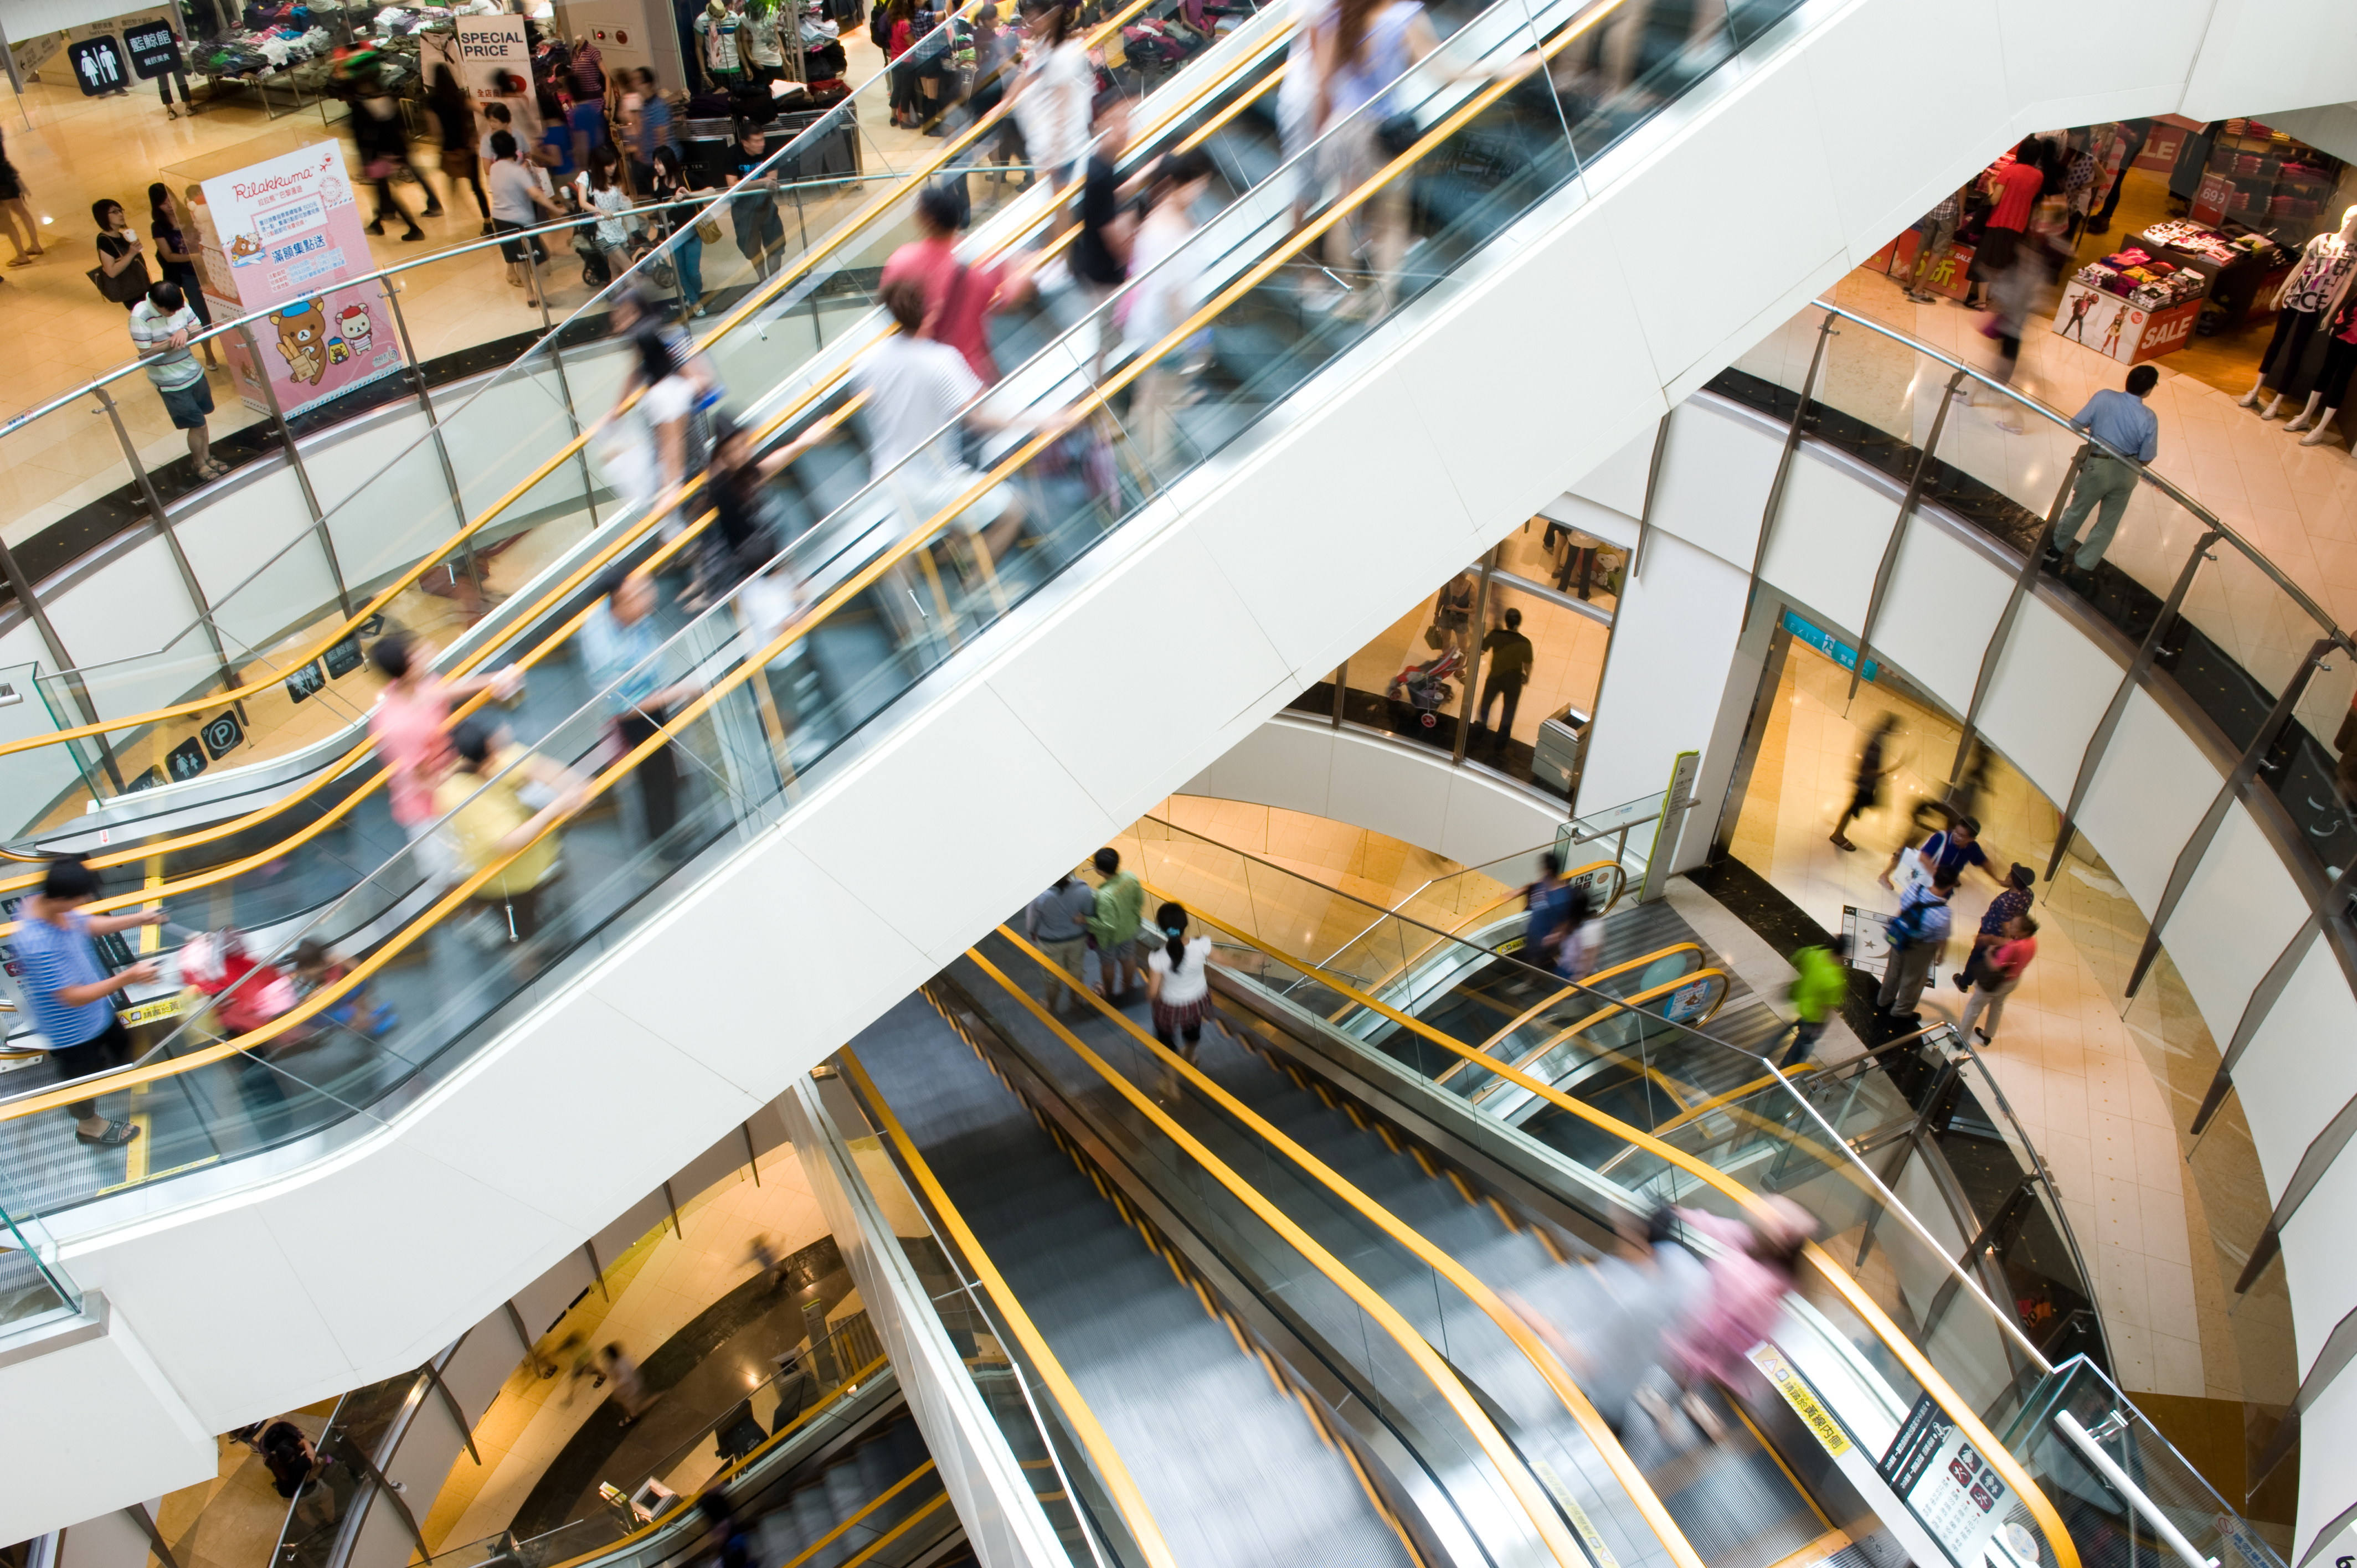 HOW TO DESIGN FIRE SAFETY INTO SHOPPING MALLS